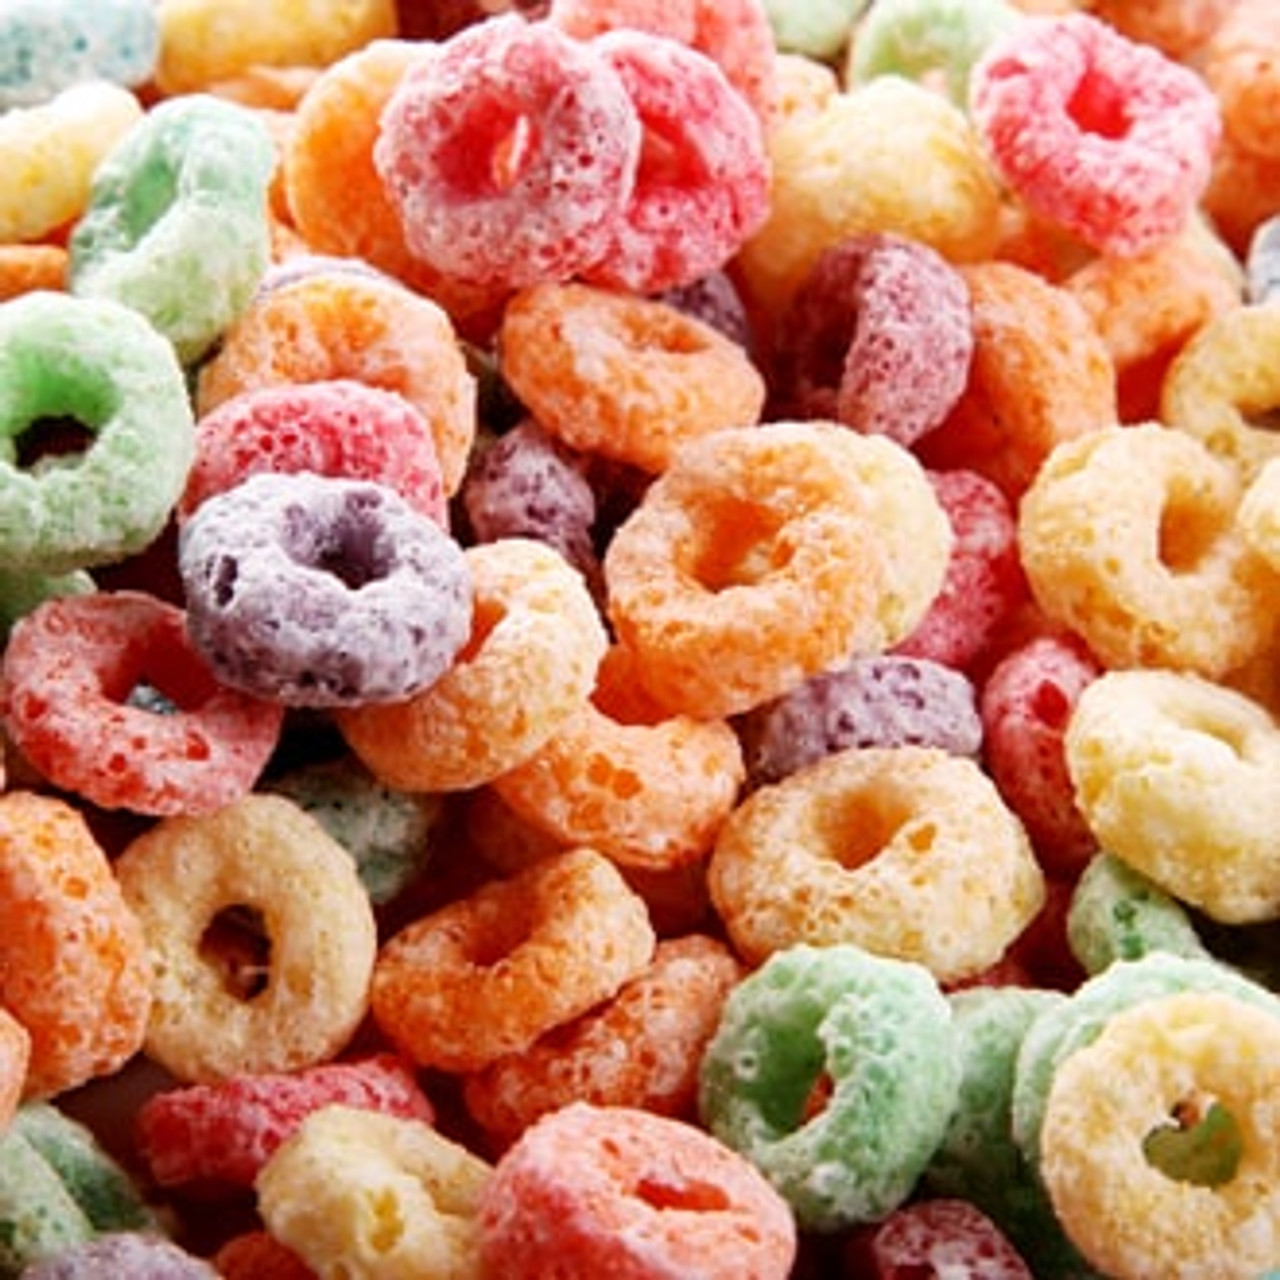 Fruit Loops Candle/Soap Fragrance Oil 1oz